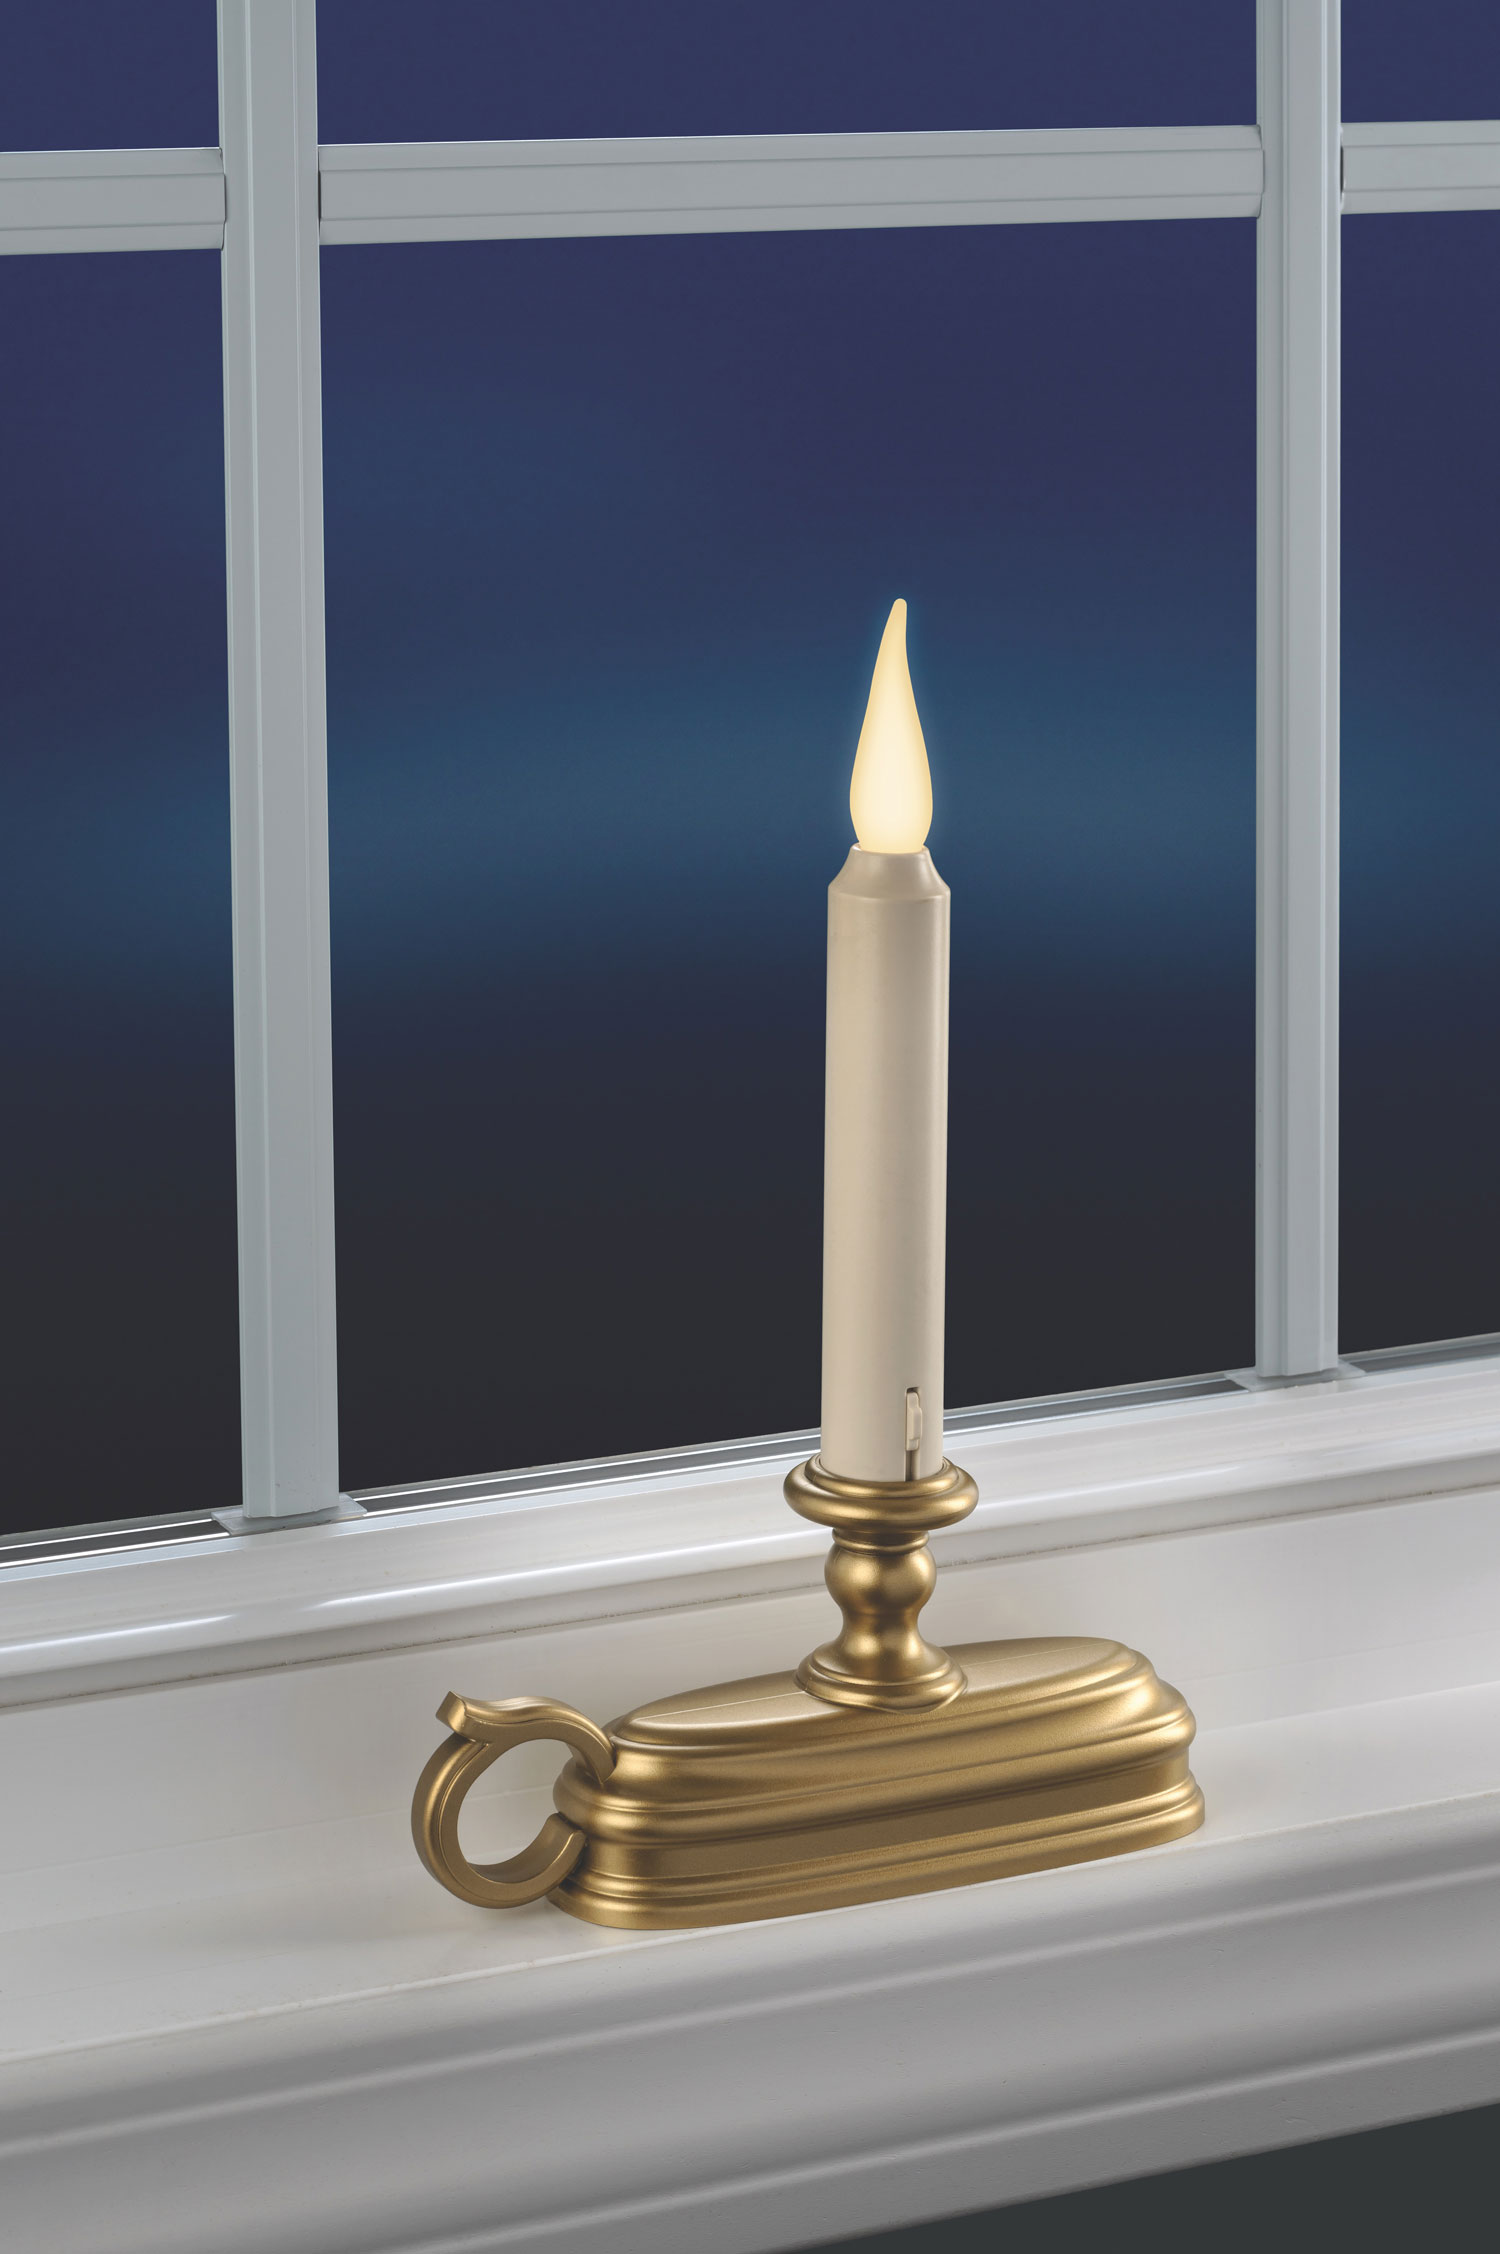 Xodus Innovations FPC1625P Battery Window Candle New Dynamic Flicker Warm White Flame Sensor on Timer Off (Silver-Single)